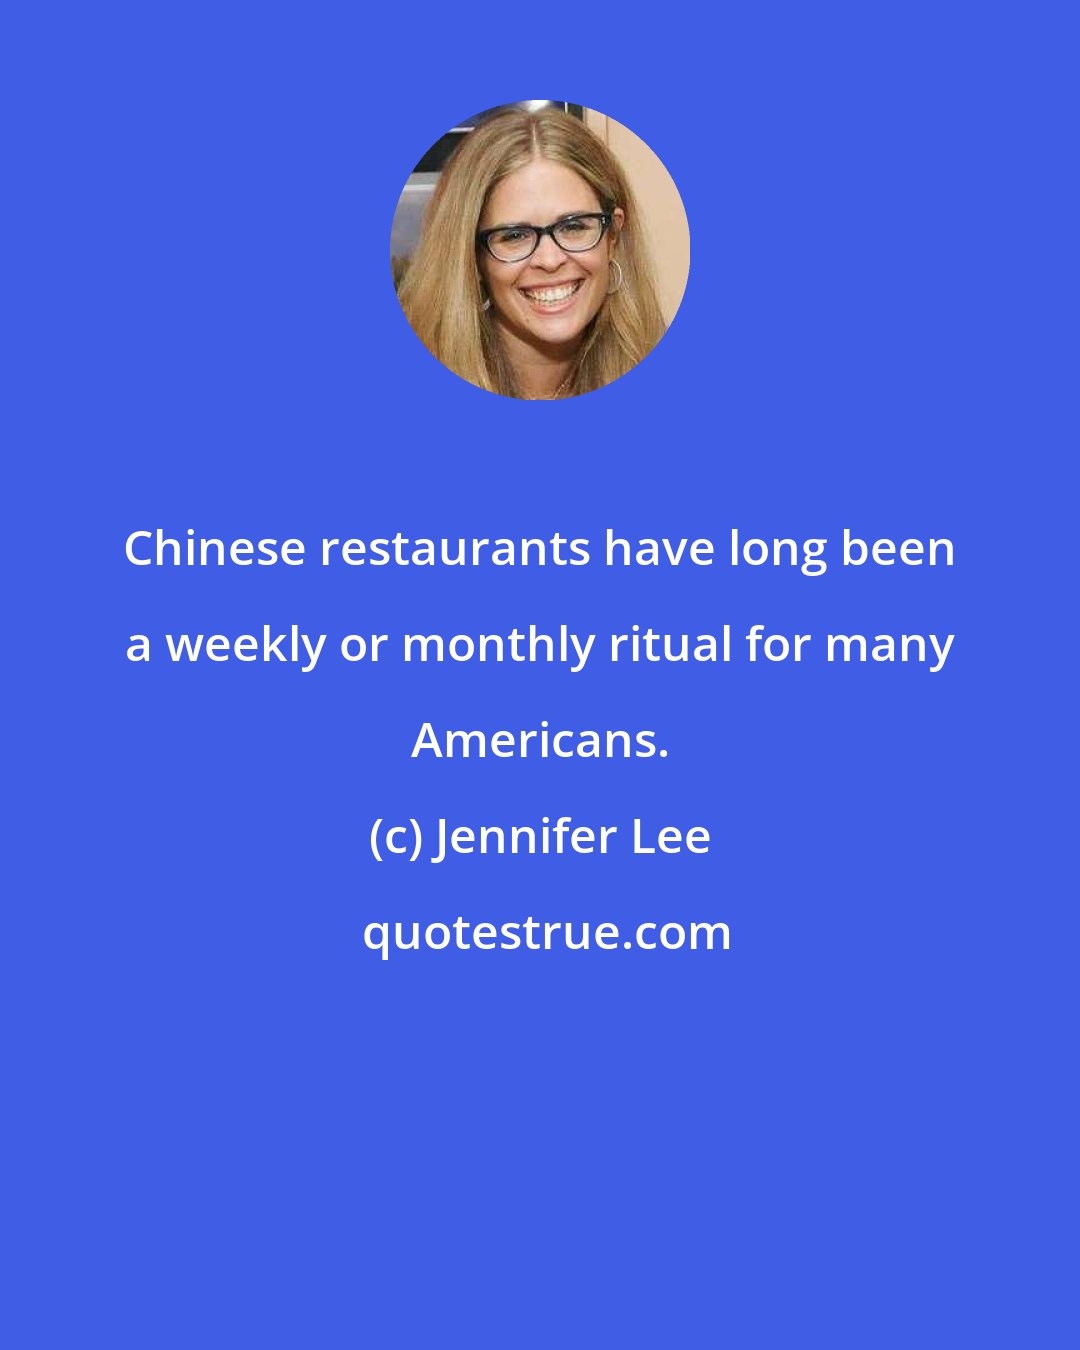 Jennifer Lee: Chinese restaurants have long been a weekly or monthly ritual for many Americans.